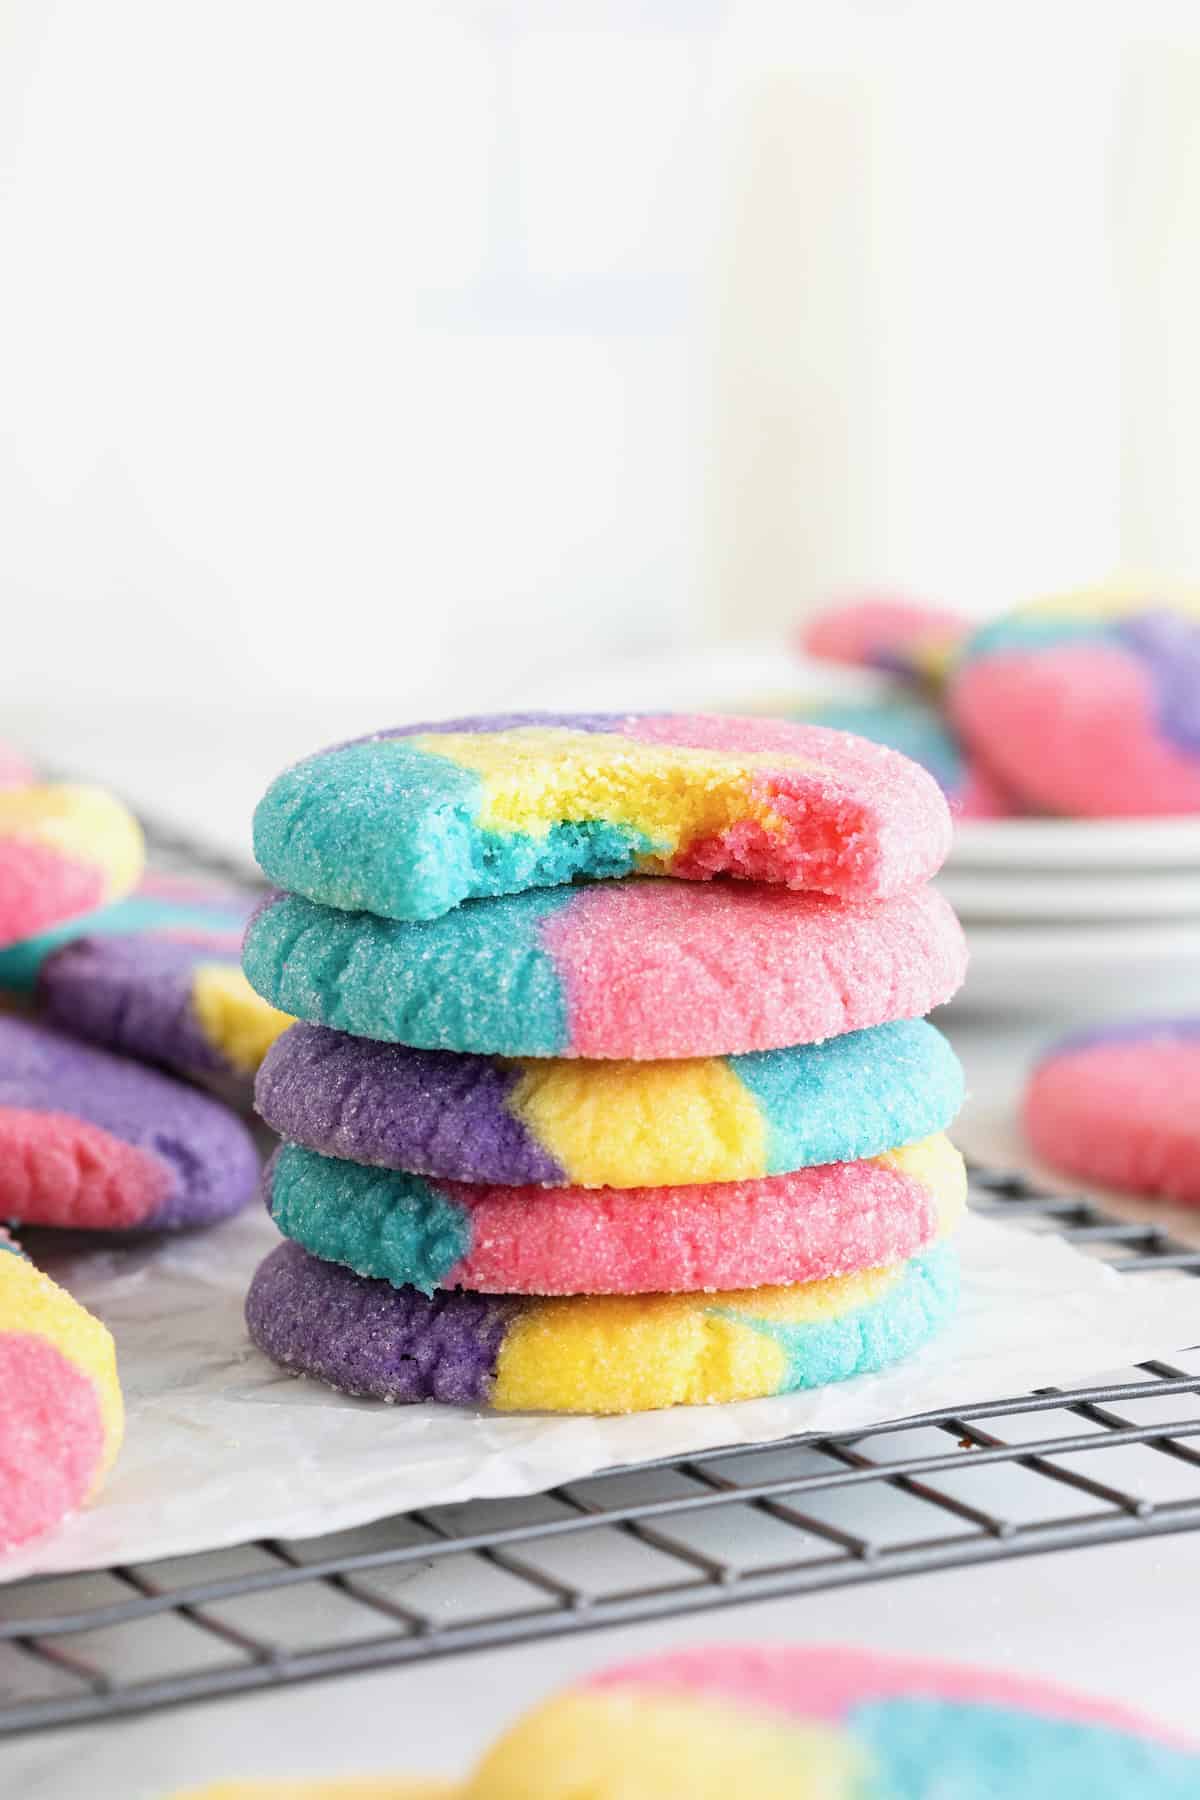 A stack of five multi-color cookies. The top cookie has a bite out of it.